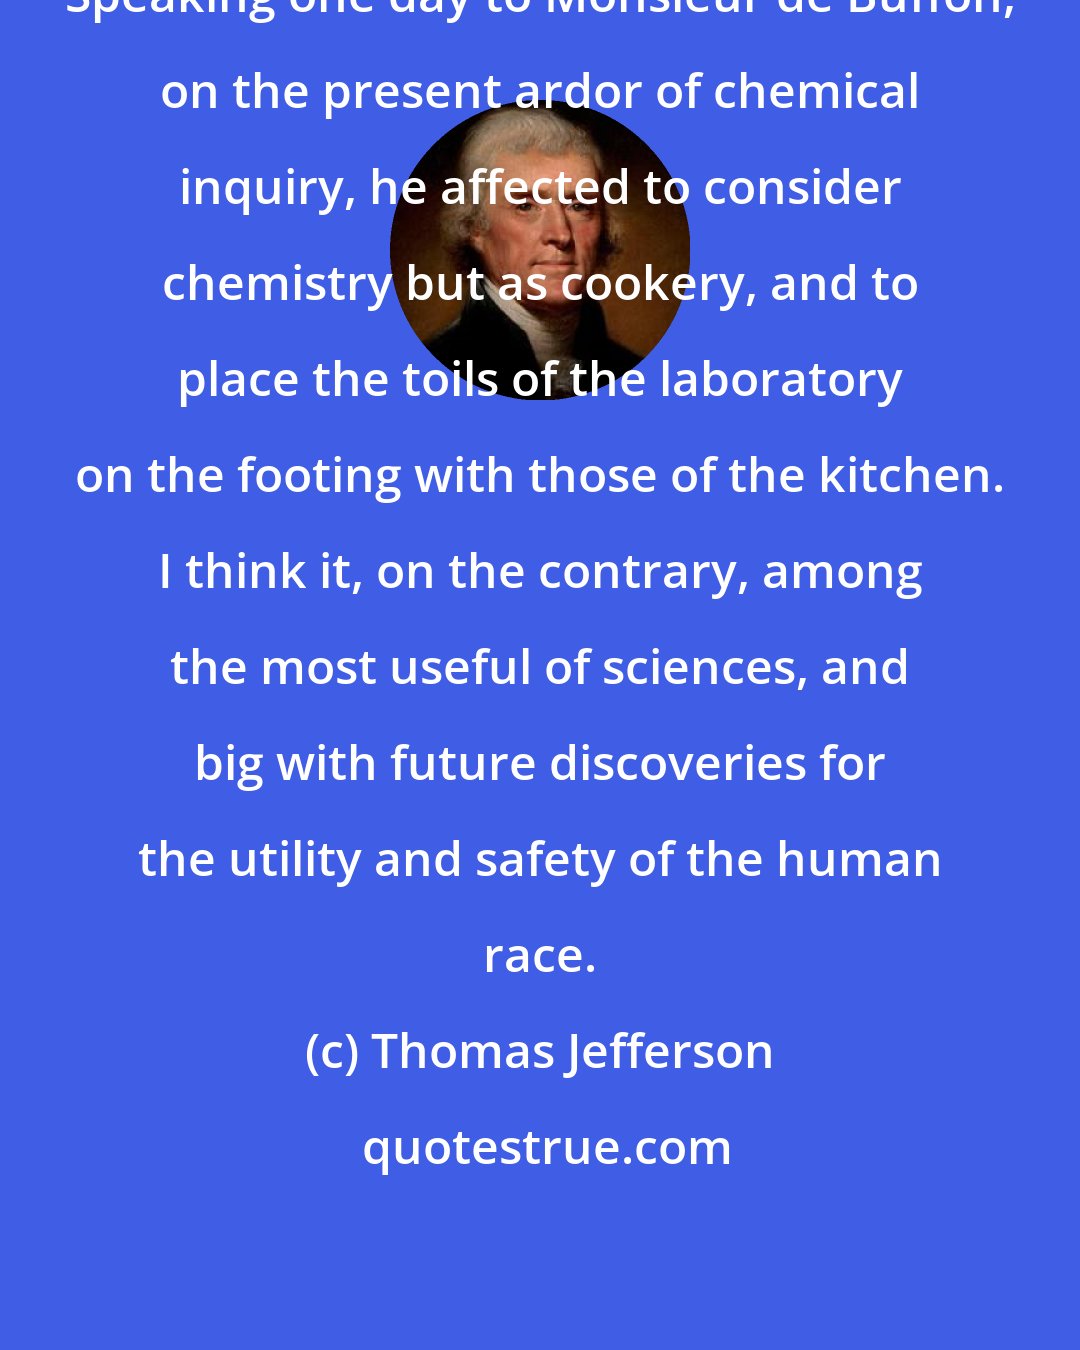 Thomas Jefferson: Speaking one day to Monsieur de Buffon, on the present ardor of chemical inquiry, he affected to consider chemistry but as cookery, and to place the toils of the laboratory on the footing with those of the kitchen. I think it, on the contrary, among the most useful of sciences, and big with future discoveries for the utility and safety of the human race.